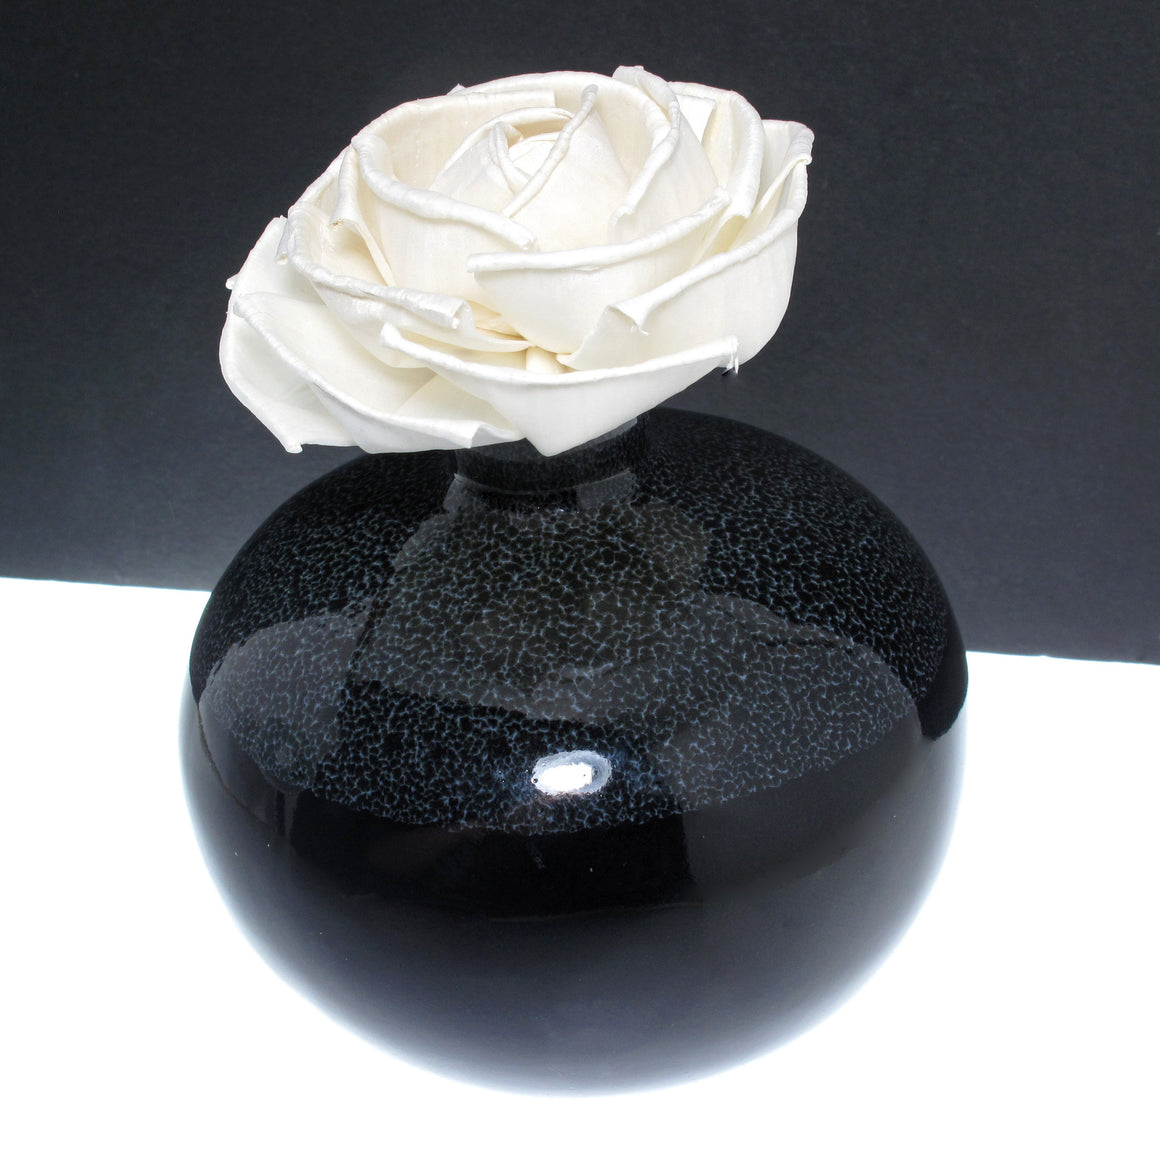 Sola Wood Flower Aroma Oil Diffuser with a Bendable Cotton Wire Wick, English Rose - TropicaZona